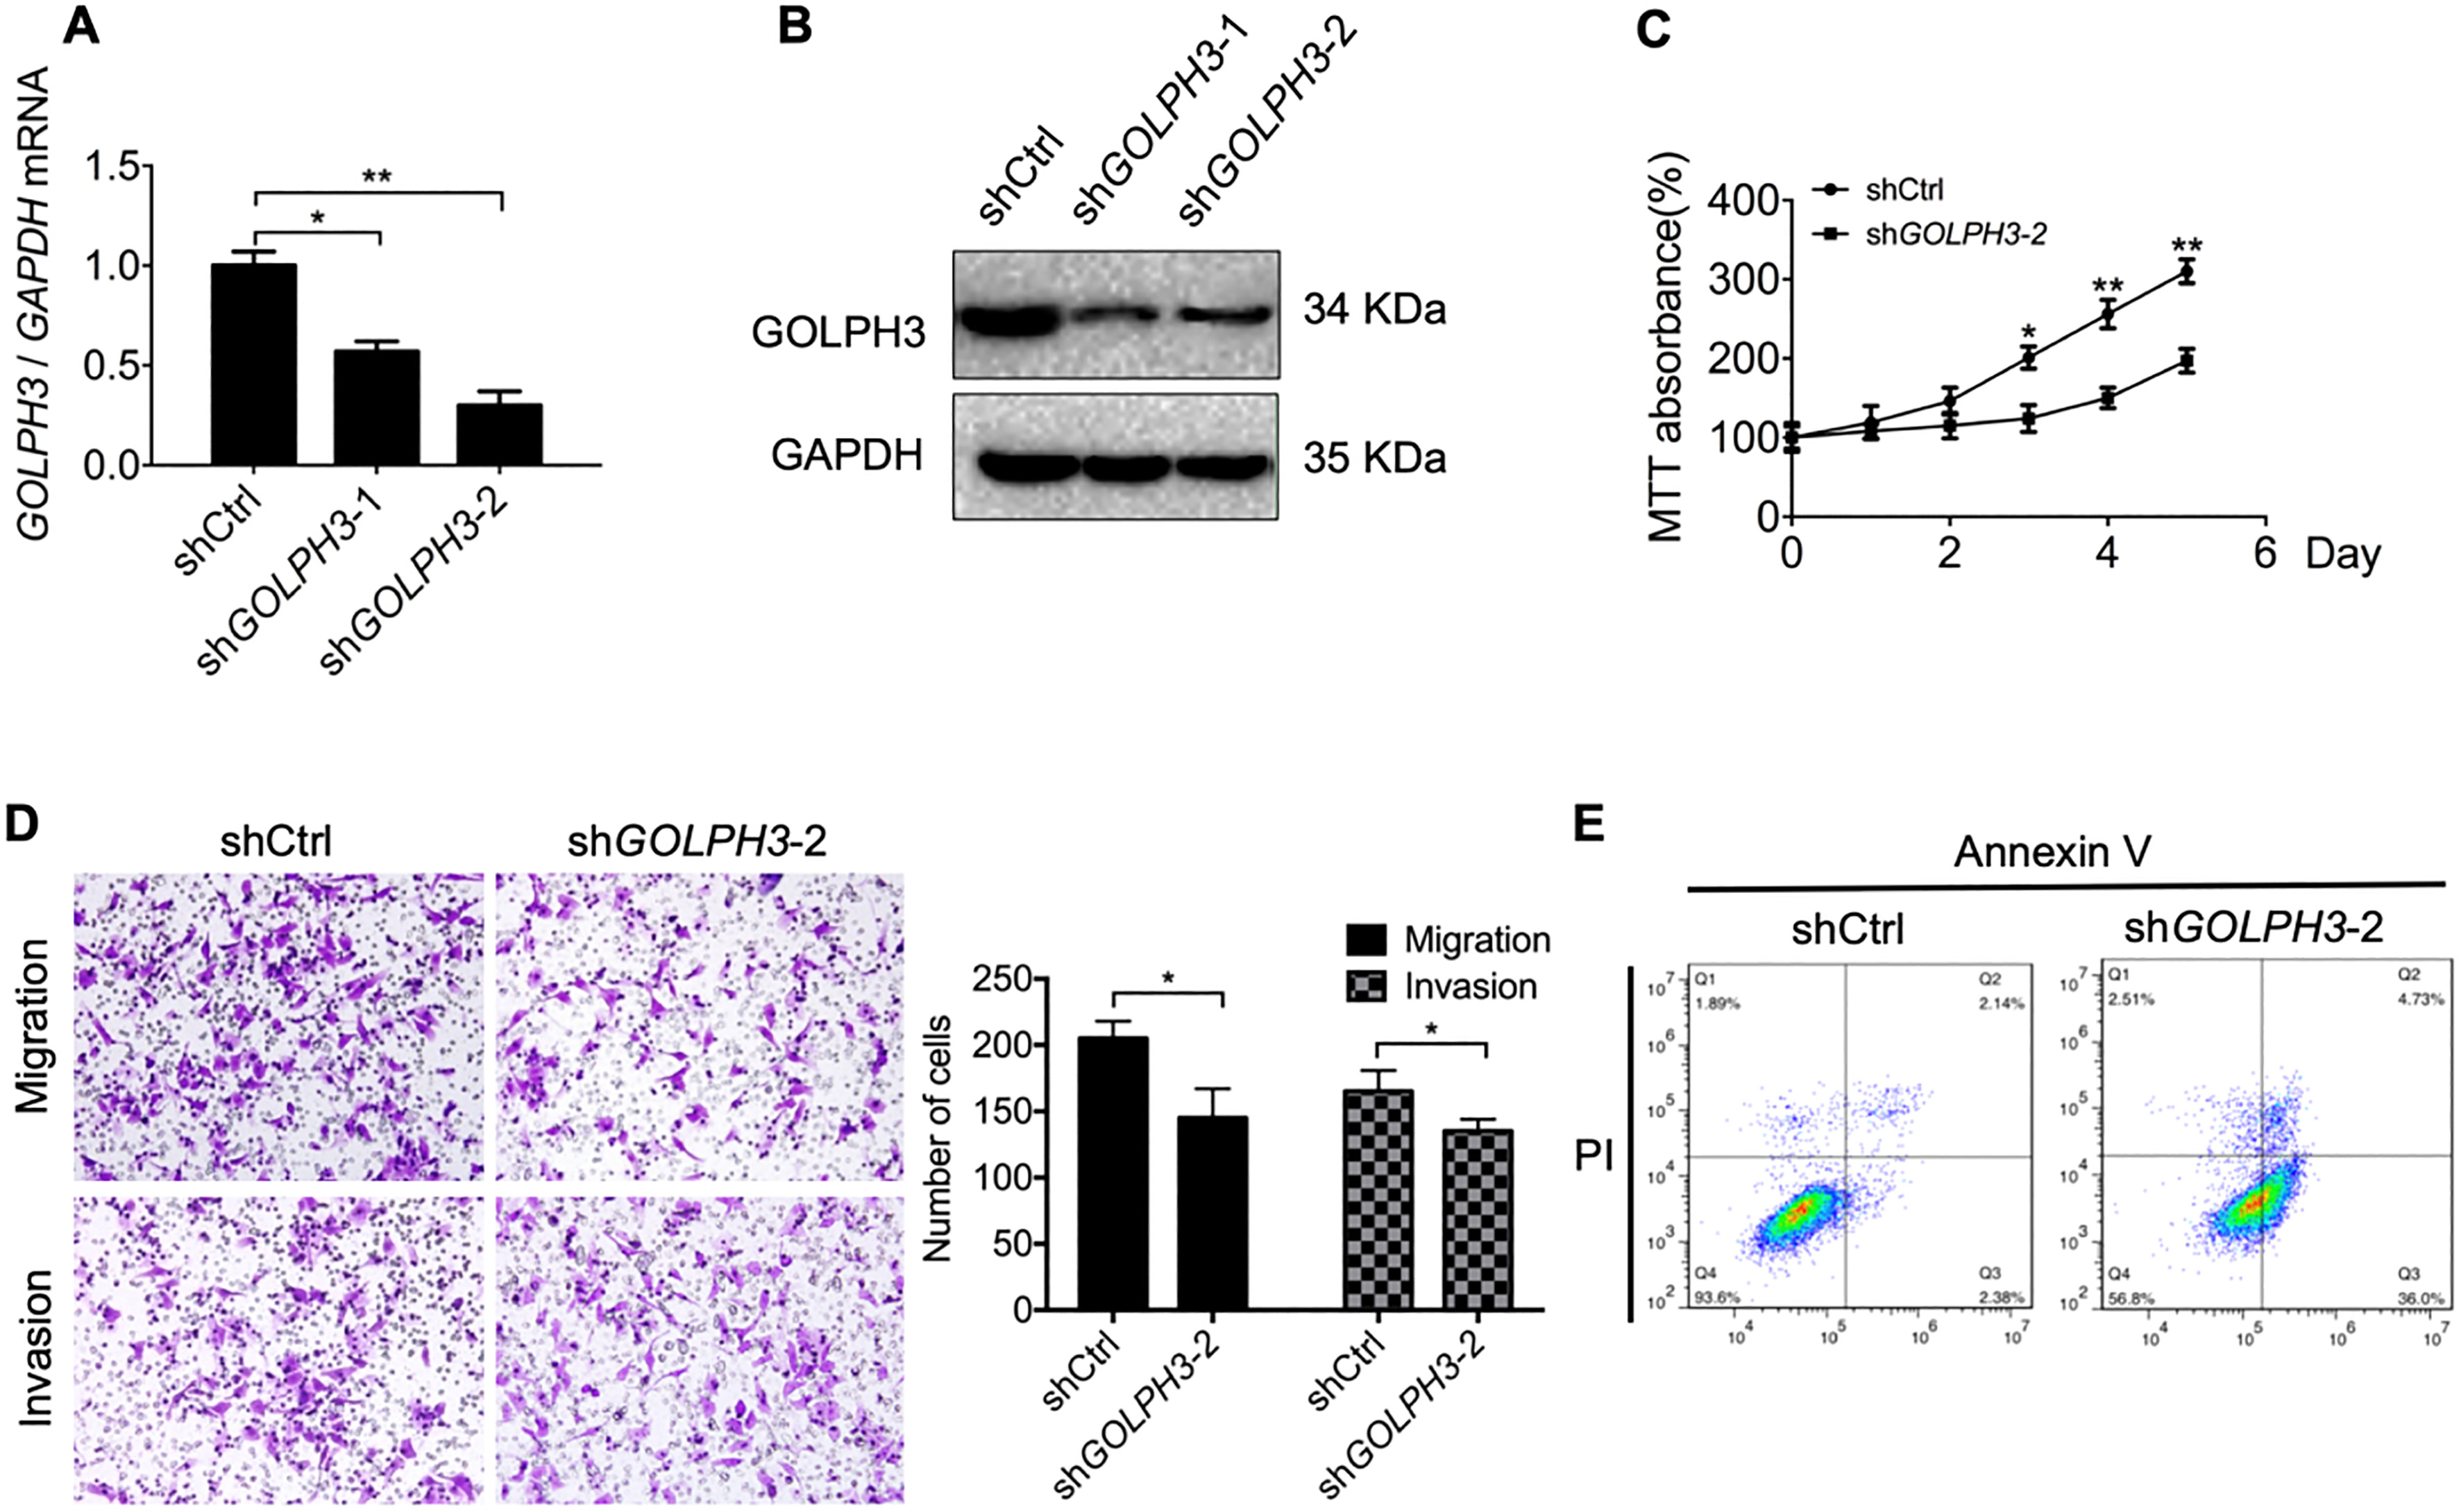 Downregulation of GOLPH3 in KLE cells reduces cell proliferation, migration, and invasion, and promotes apoptosis in vitro. (A–B) Knockdown of GOLPH3 in KLE cells transfected with shGOLPH3 (KLE-sdGOLPH3 cells) compared to control cells transfected with empty vector was verified by qRT-PCR and western blotting. (C) Serial CCK-8 cell viability assays showing slower proliferation of knockdown cells compared to controls. (D) Downregulation of GOLPH3 also reduced cell migration and invasion in transwell assays. Magnification 100×. (E) Downregulation of GOLPH3 promoted apoptosis of KLE cells as measured by Annexin/PI staining and flow cytometry. All values are the mean ± SD of three independent experiments. P*< 0.05, P**< 0.01.